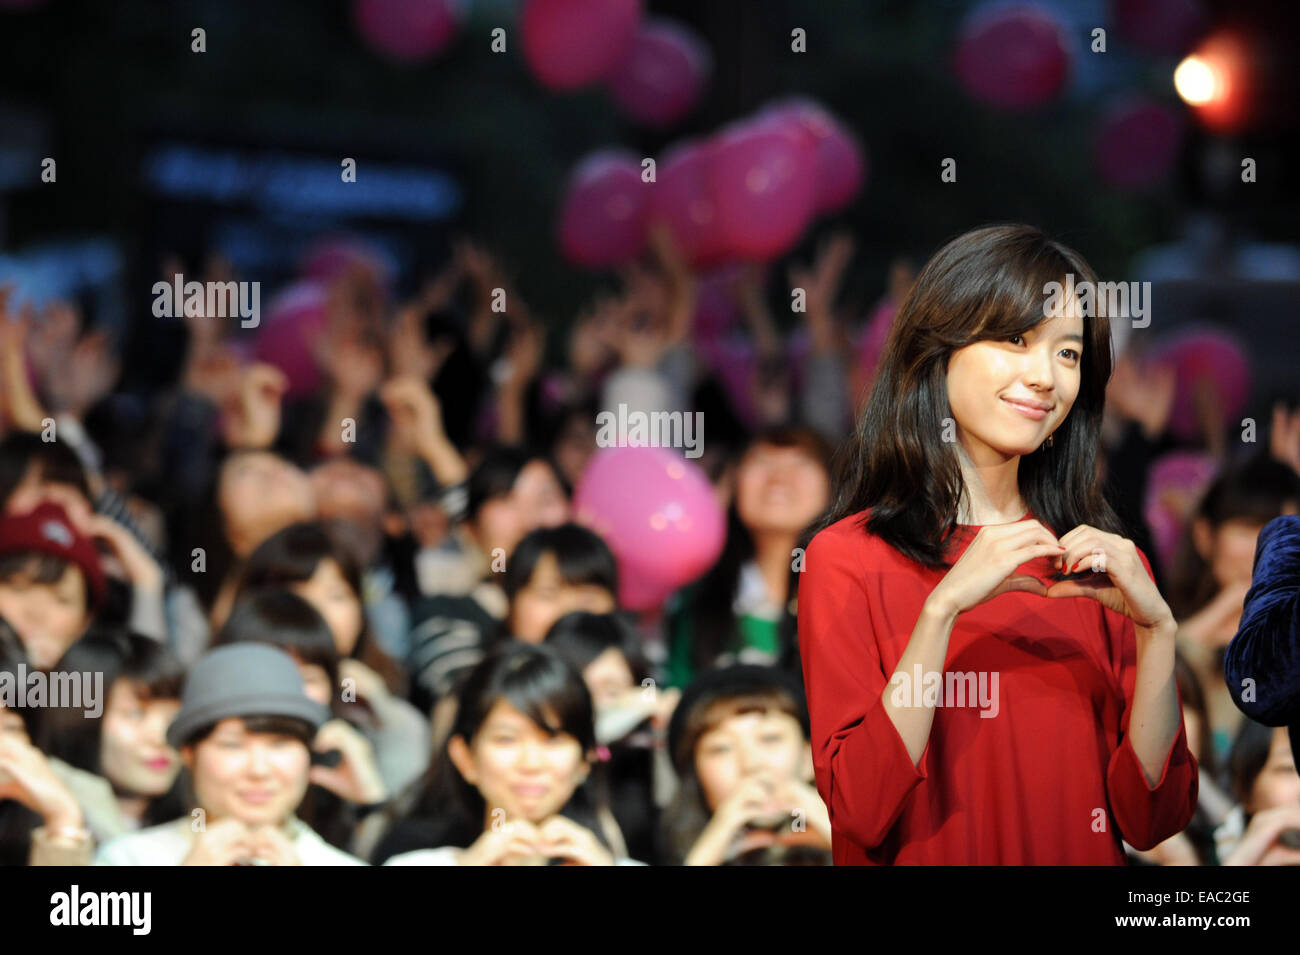 Actress Hyo-Joo Han attends premiere event for her first appearance in Japanese movie at Tokyo International Film Festival. Stock Photo